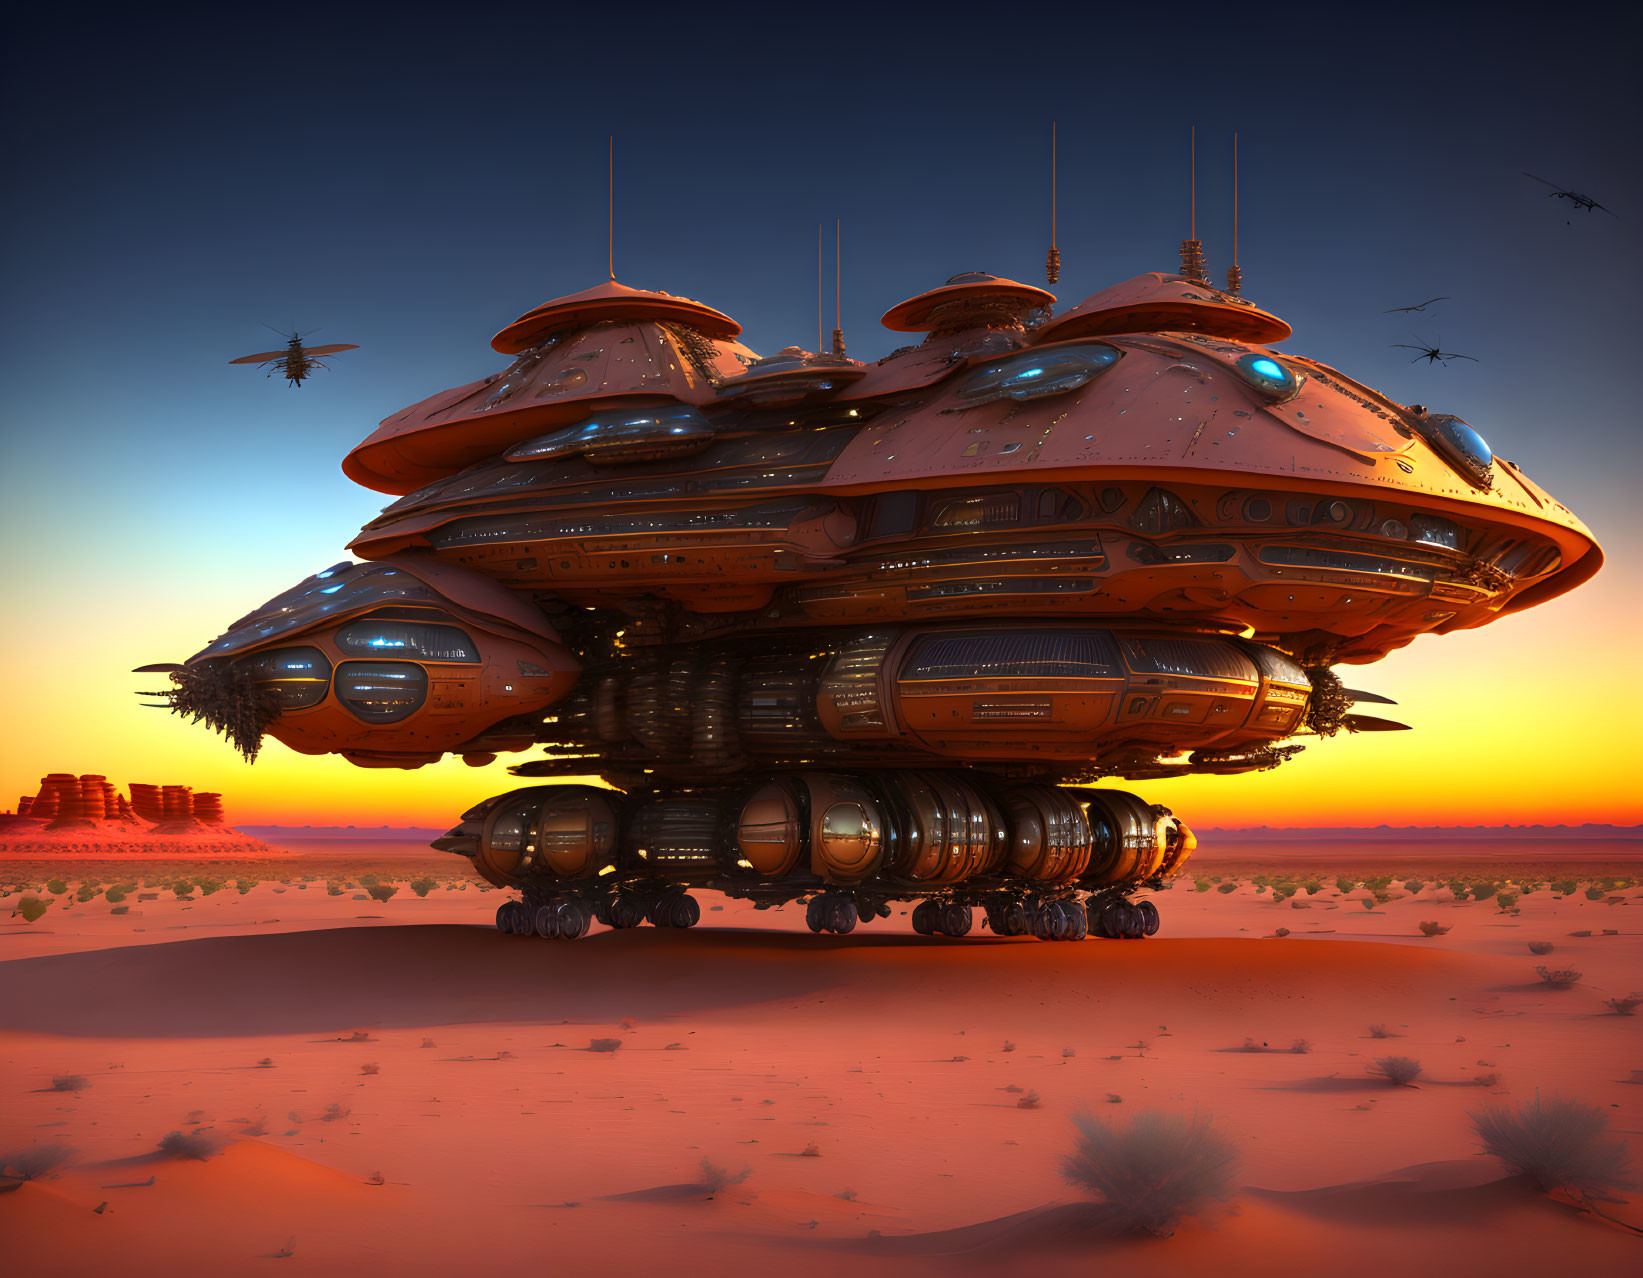 Futuristic multi-tiered vehicle in desert sunset with antennas and spherical sections